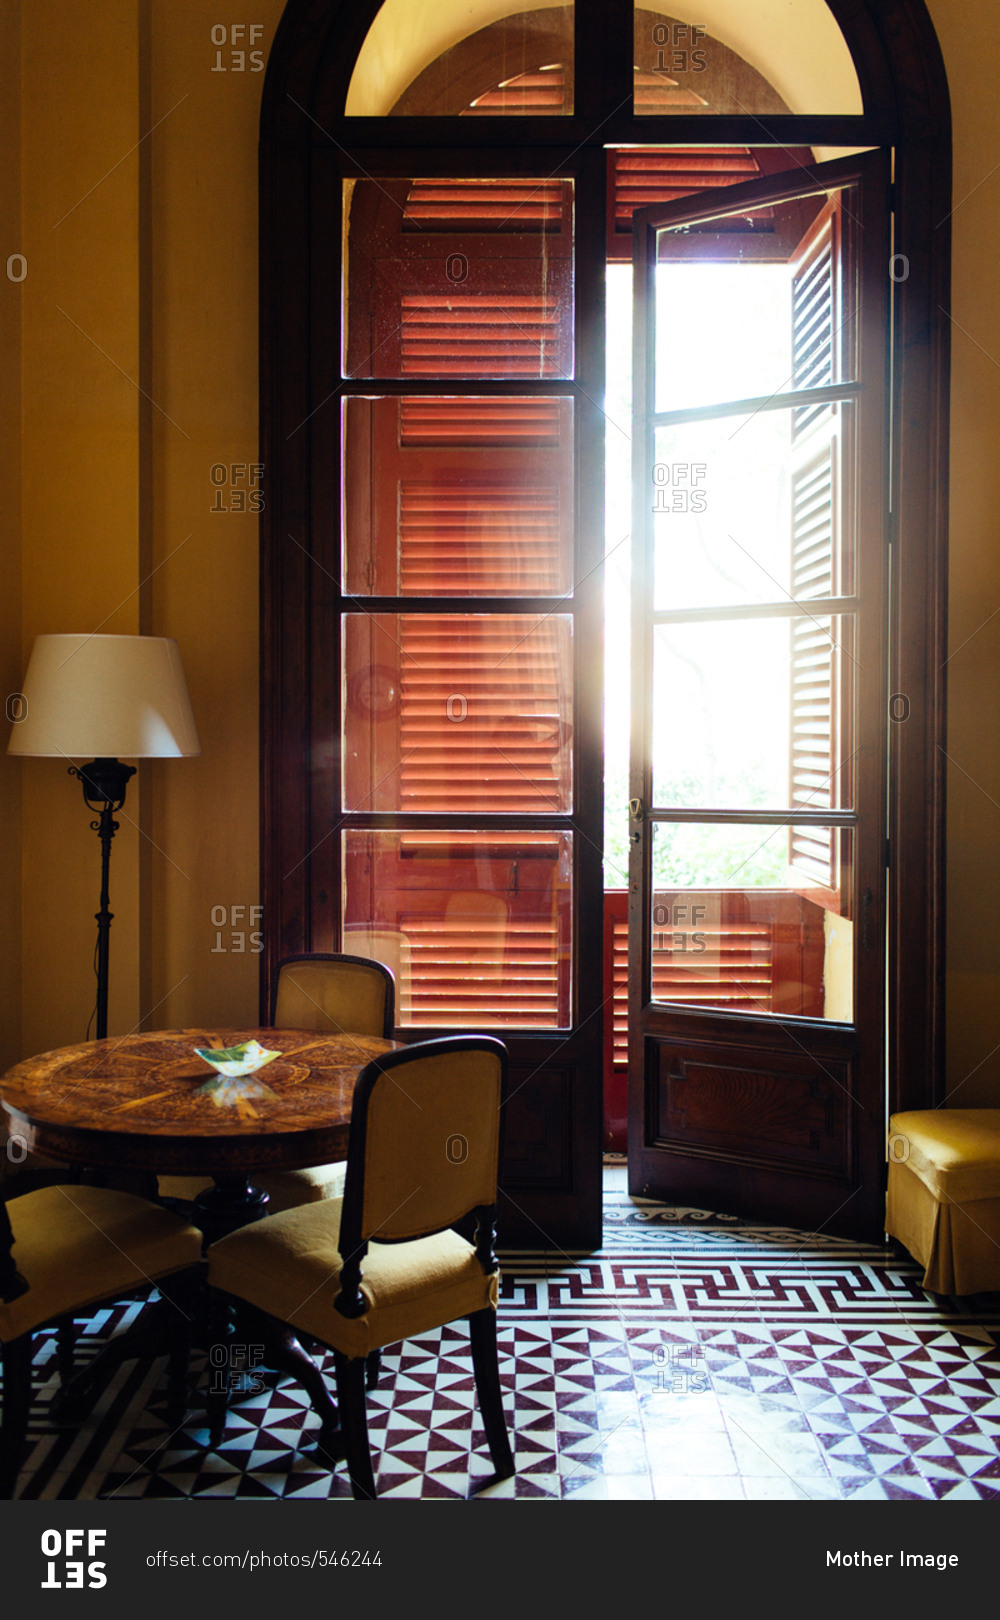 Sunlight shining through a window on a dining table and tile floor, Piano di Sorrento, Italy